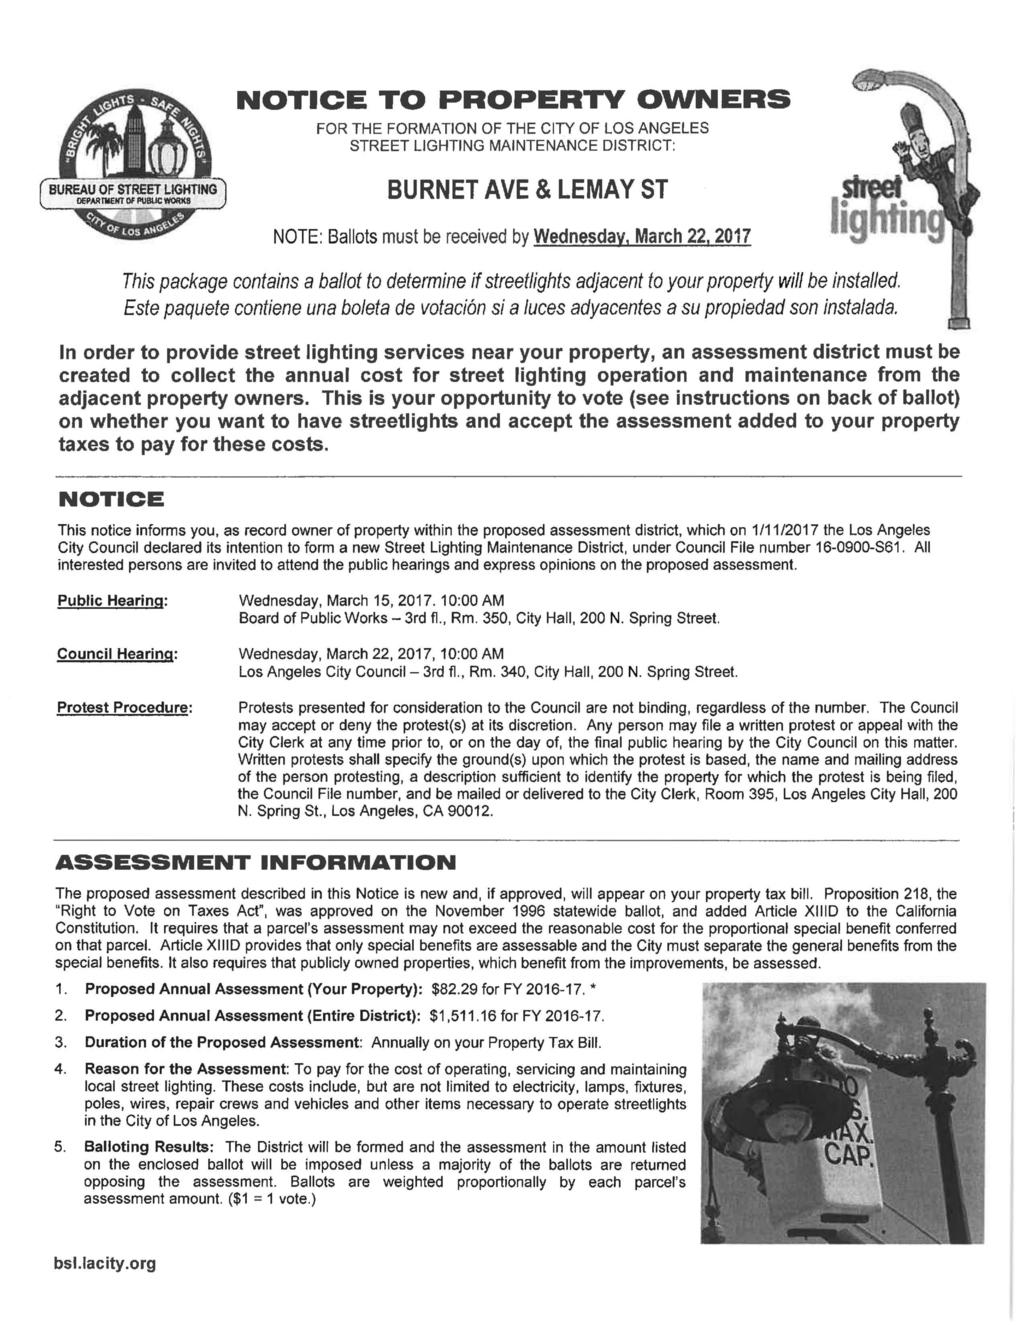 NOTICE TO PROPERTY OWNERS FOR THE FORMATION OF THE CITY OF LOS ANGELES STREET LIGHTING MAINTENANCE DISTRICT: BUREAU OF STREET LIGHTING rewmarr Of mbuc *<ork8 BURNET AVE & LEMAY ST NOTE: Ballots must